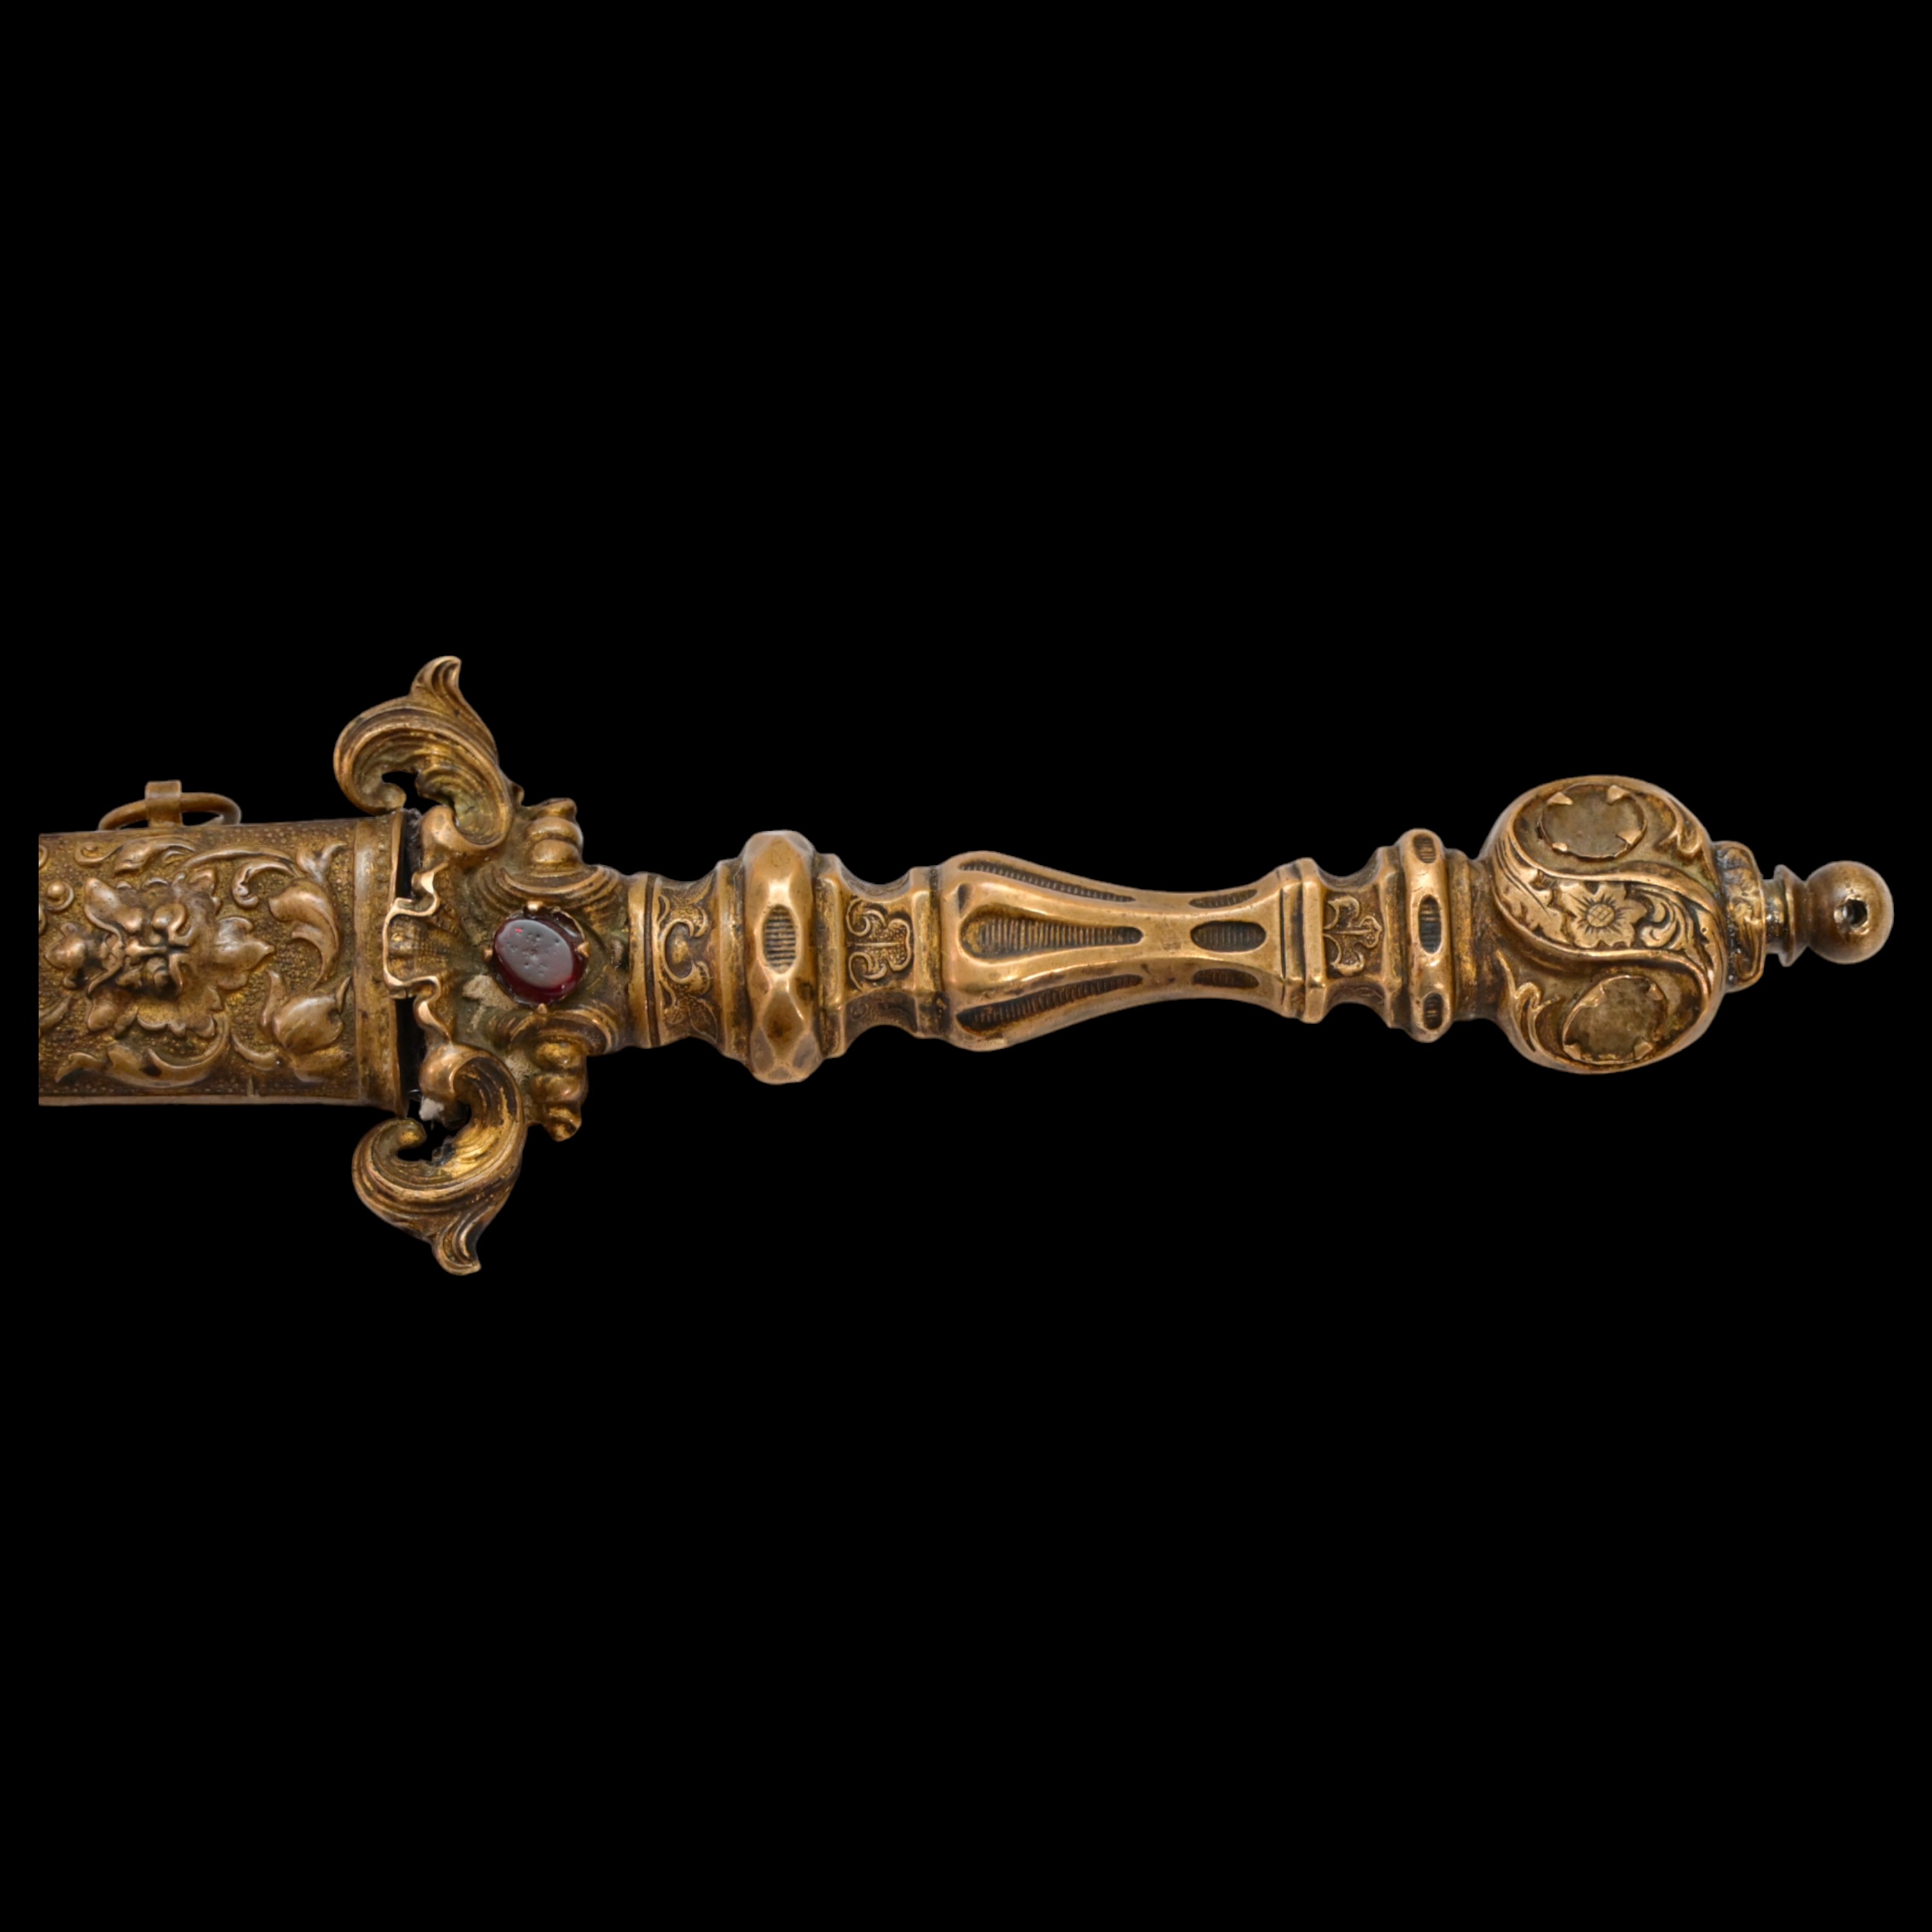 A Very high quality Dagger Renaissance Style Brass with inlaid colored stones, 19th century. - Image 7 of 9